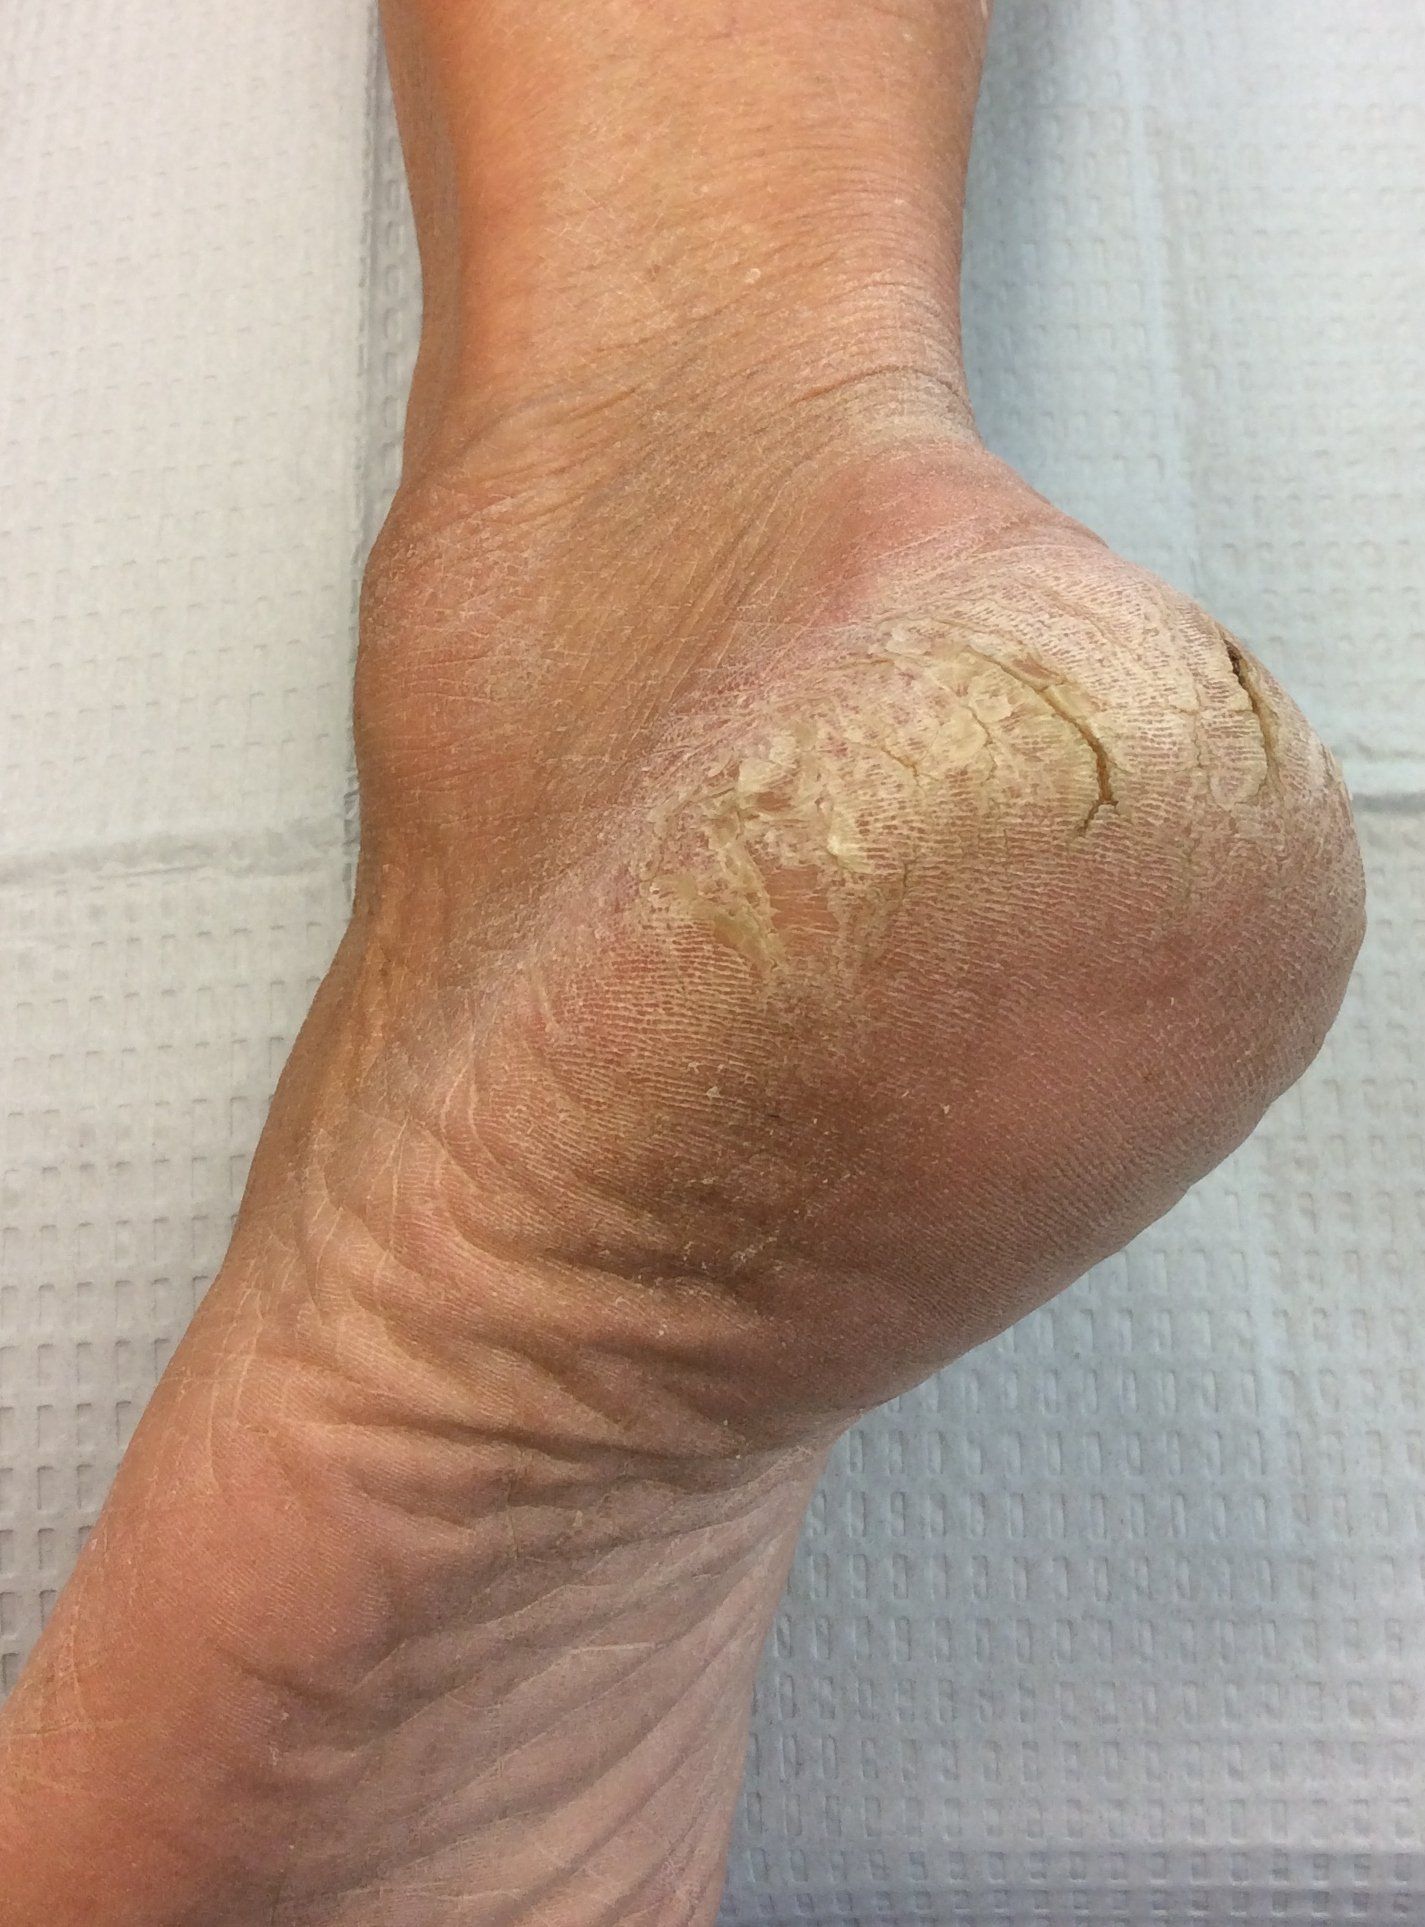 Callus on the bottom of foot